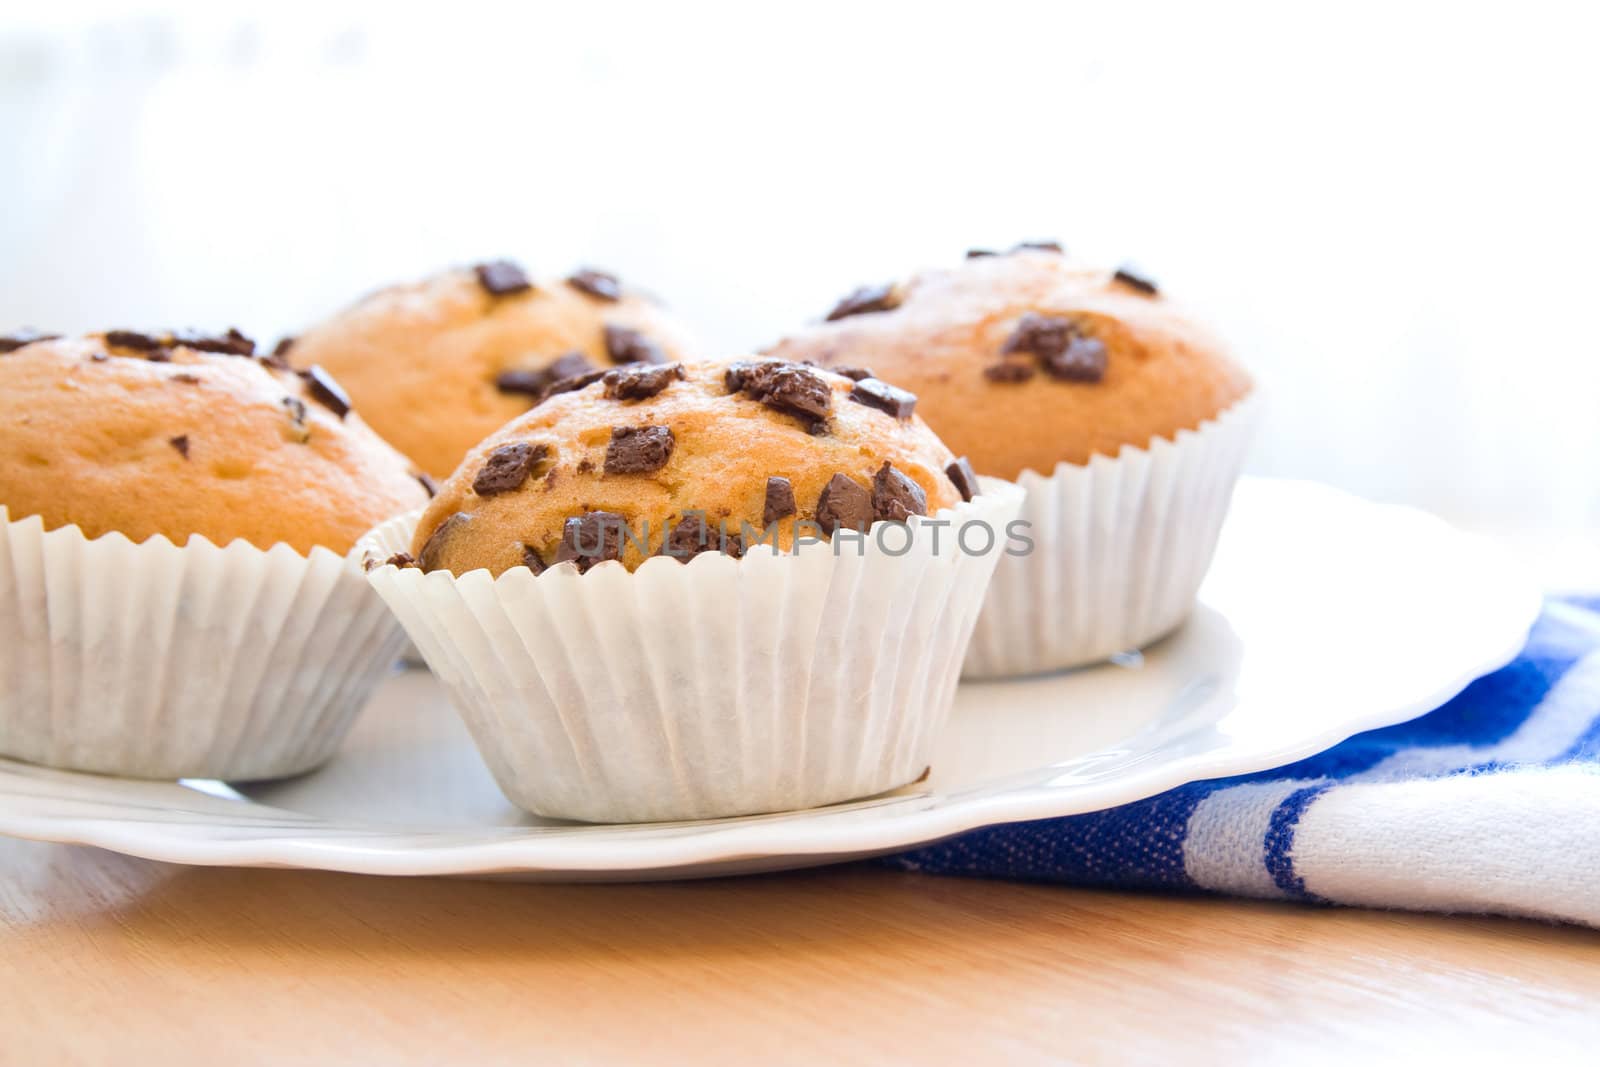 Four chocolate muffins on plate prepared for breakfast.